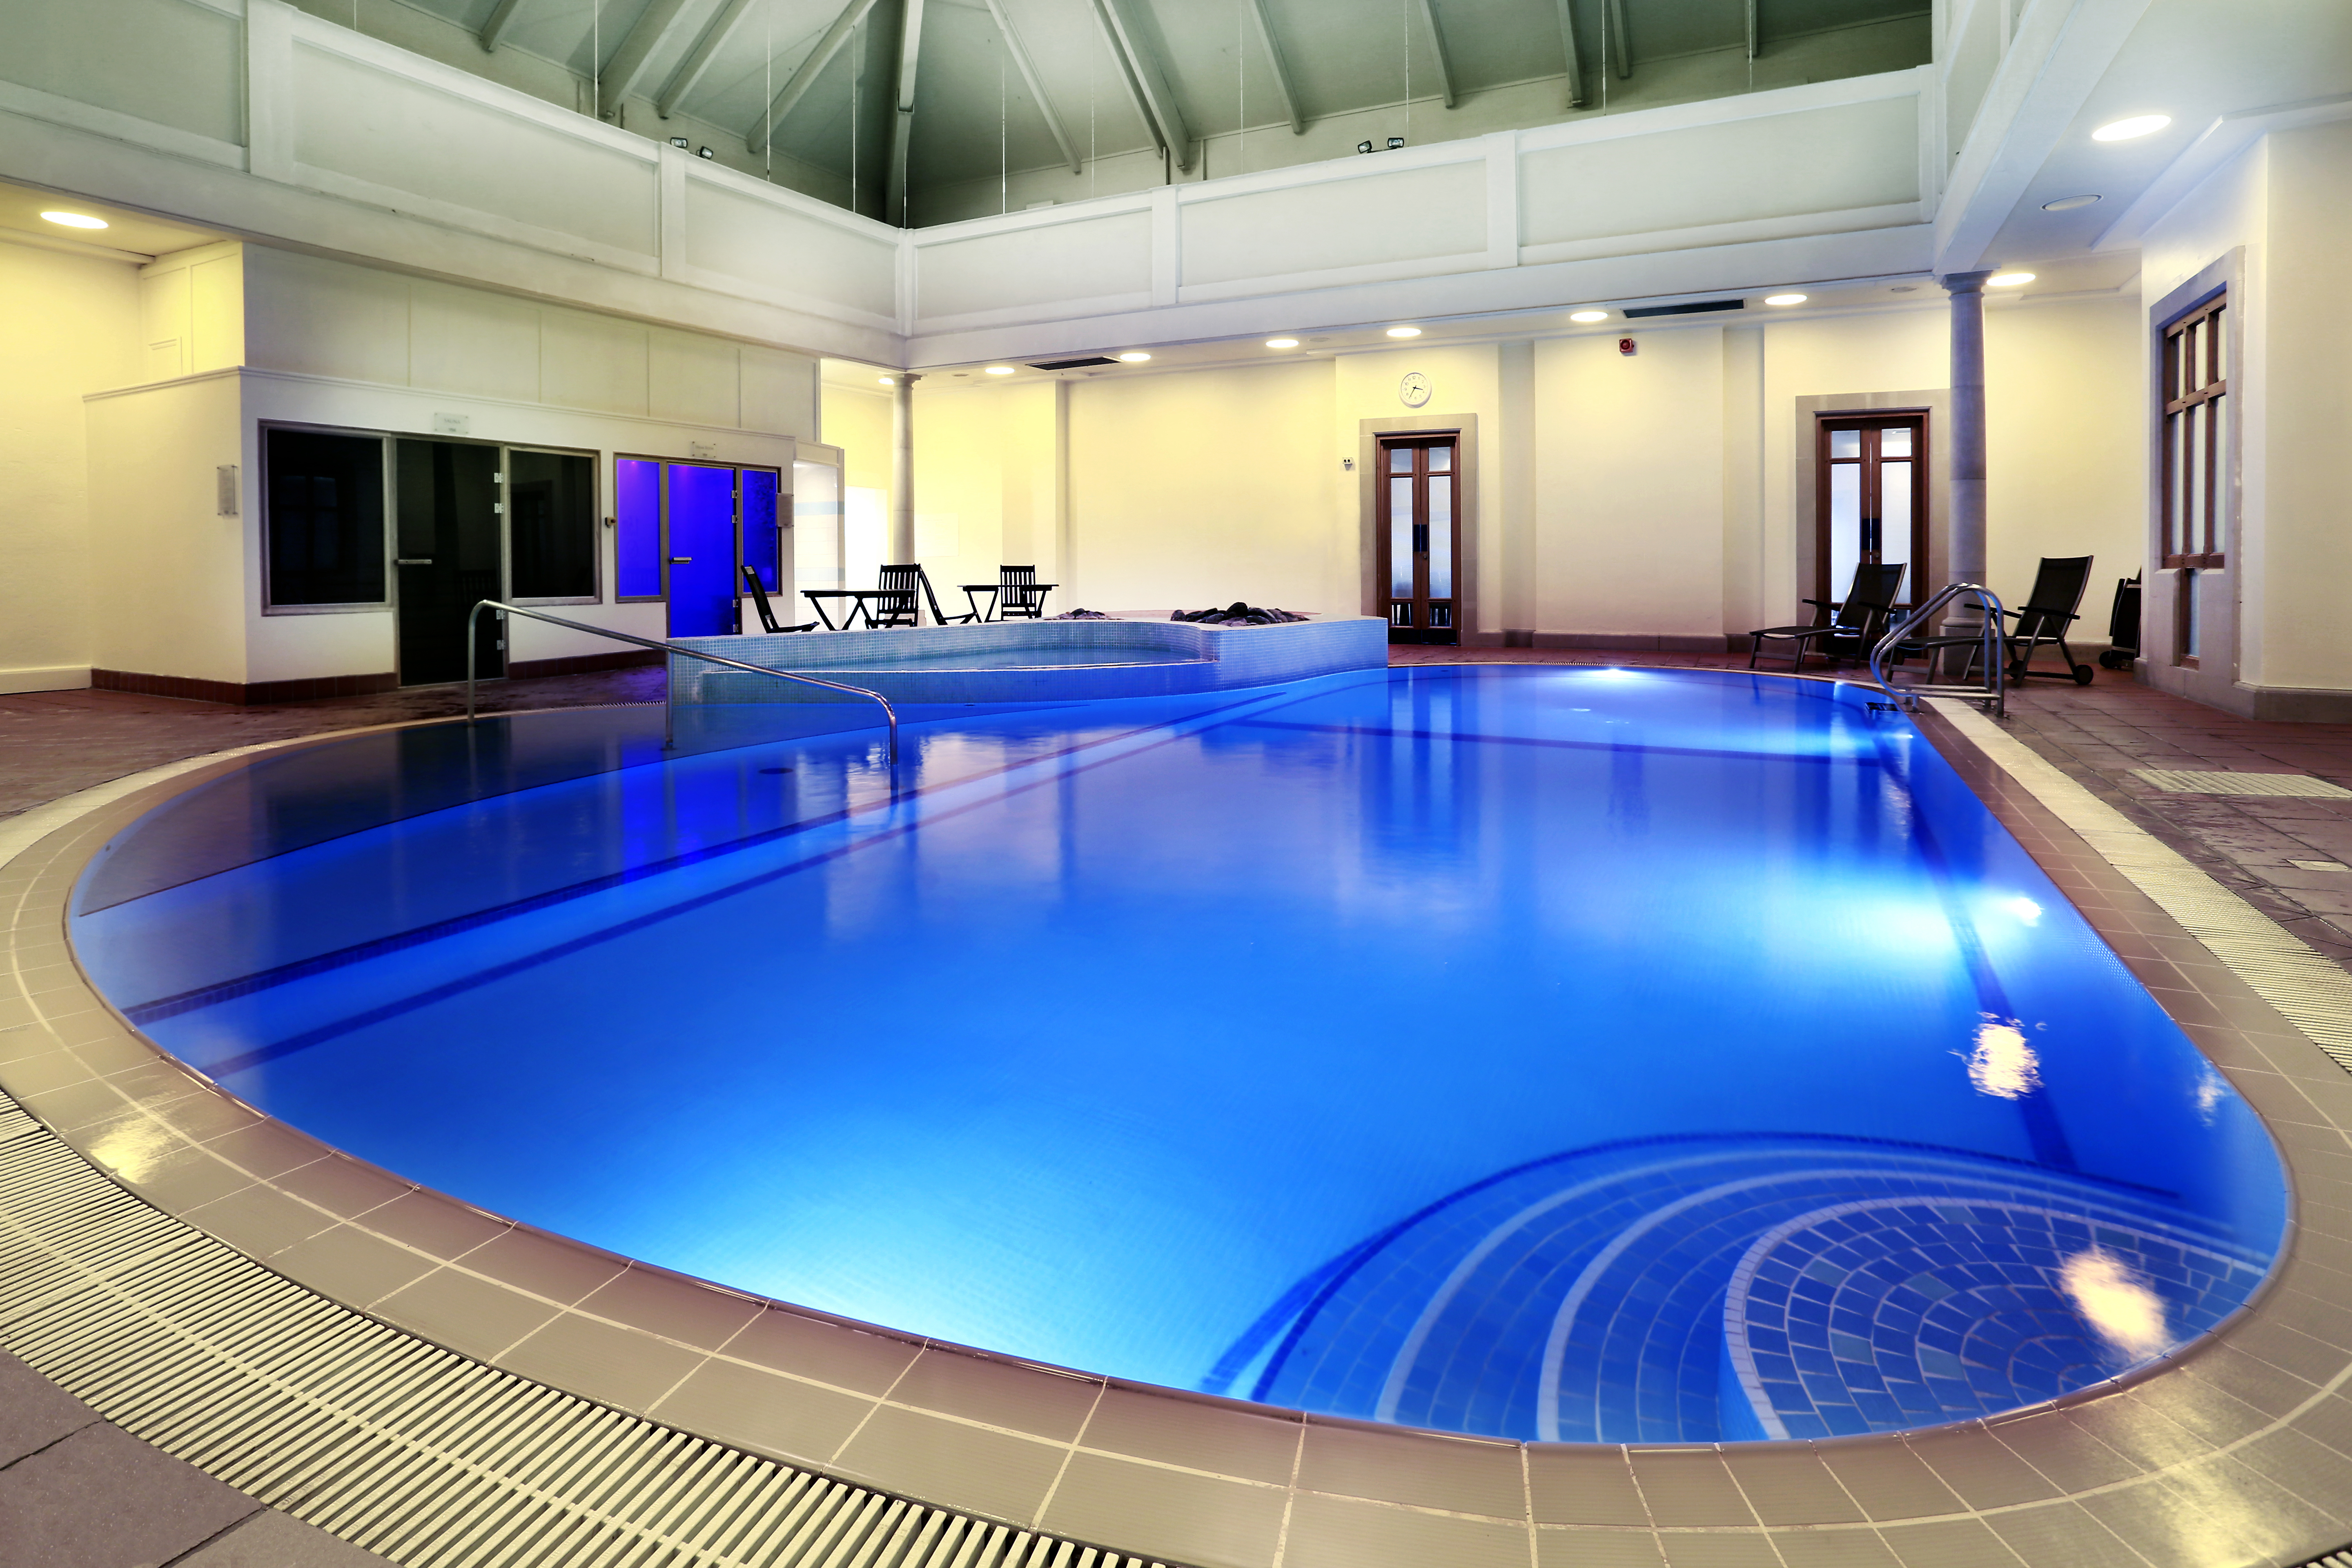 1 Night The Essential Spa Break For Two, Macdonald Botley Park Hotel A